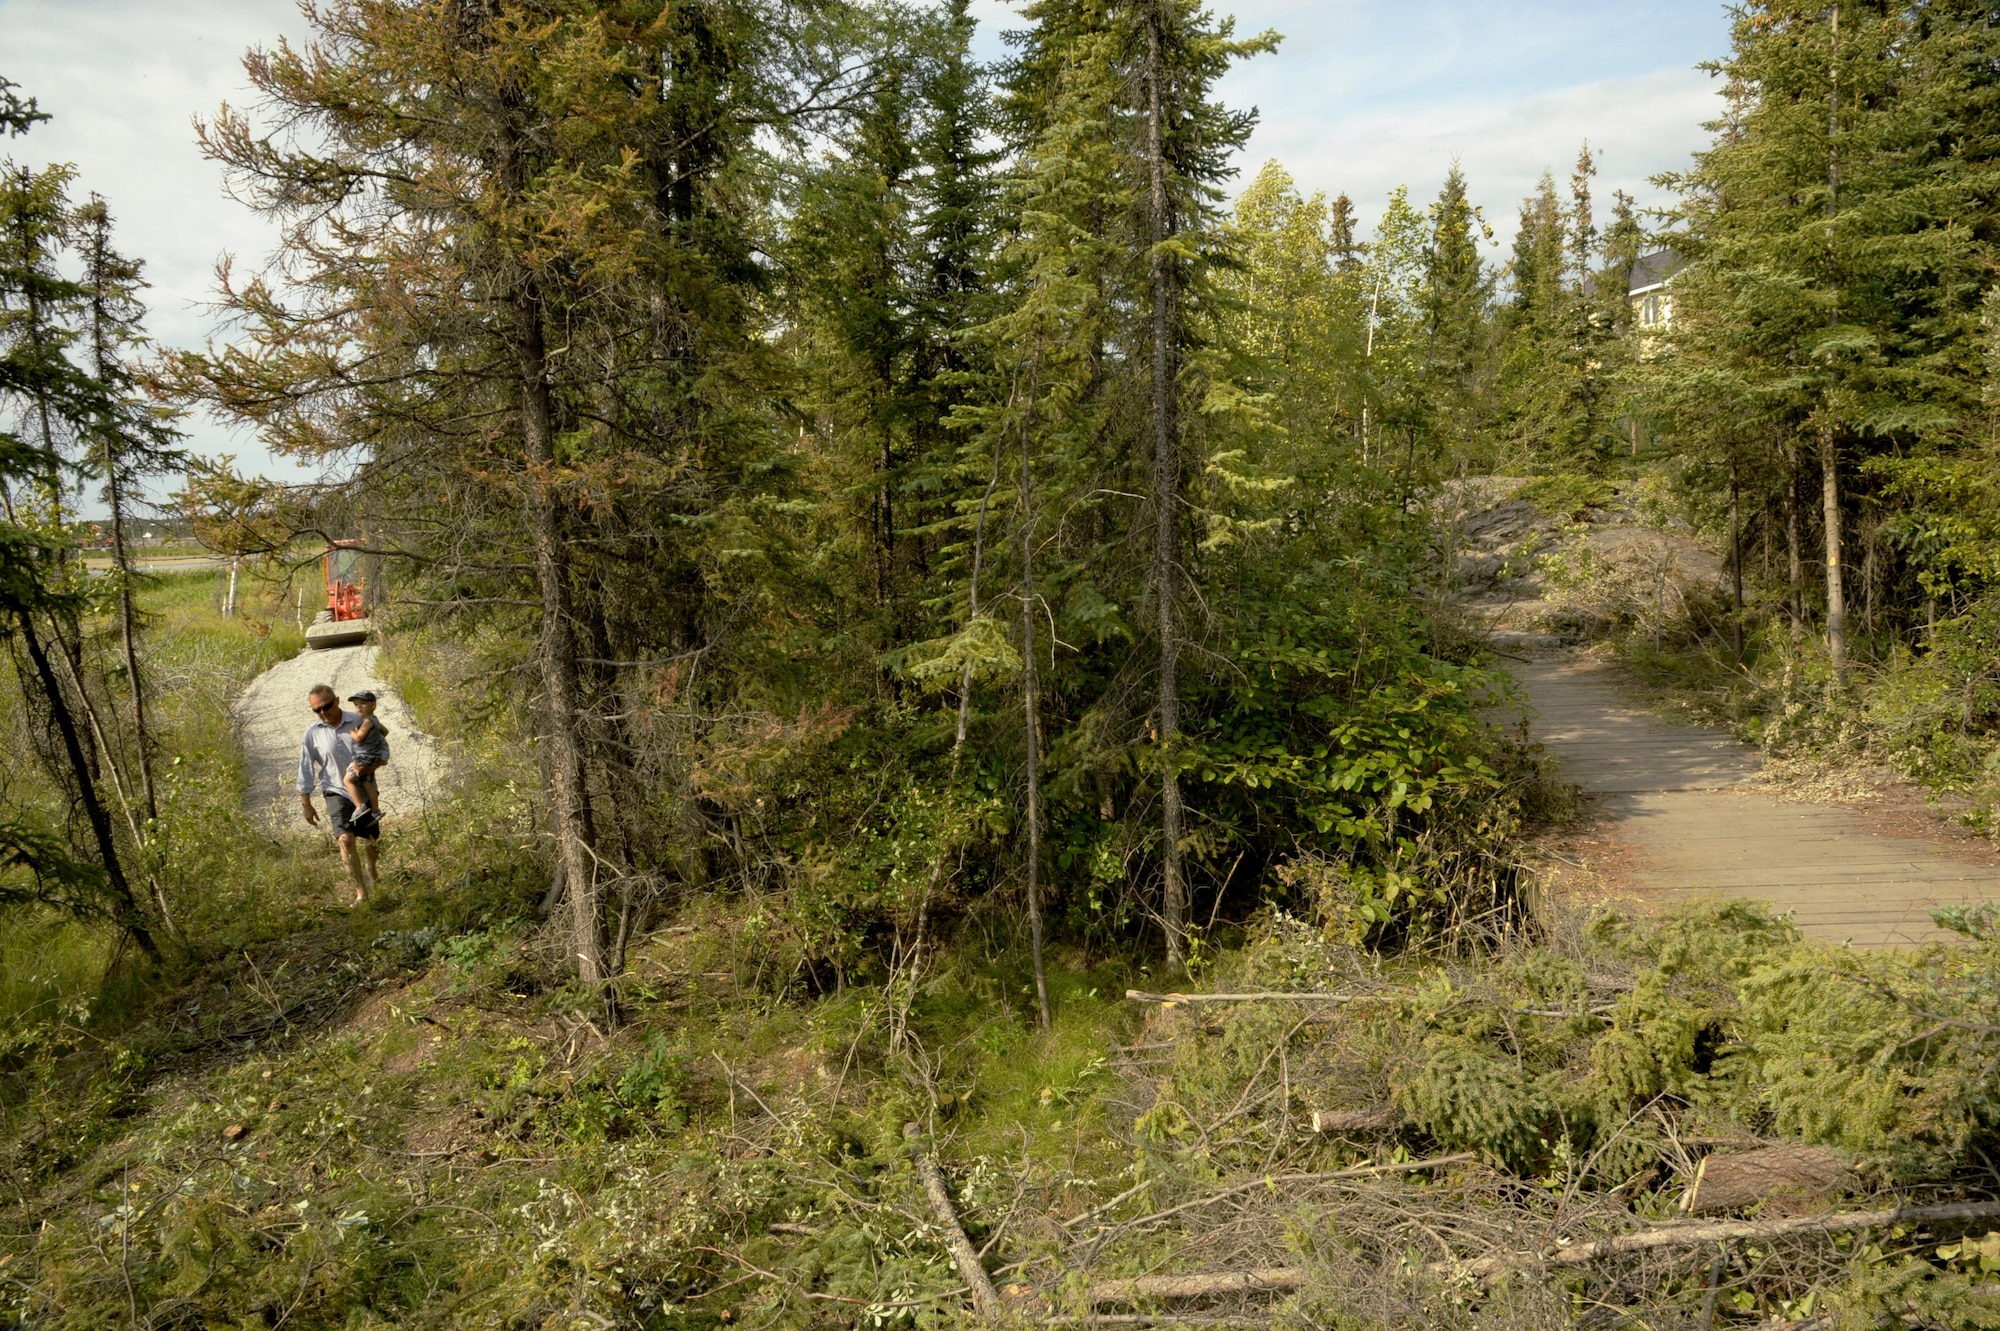 Oregon Air National Guardsmen from the 142nd Fighter Wing Civil Engineer Squadron, Portland, Oregon, work to construct a new pedestrian friendly trail (picture left) at Niven Lake in Yellowknife, Northwest Territories, Canada during their two-week Deployment For Training, July 21, 2017. The Oregon Airmen are also collaborating with Canadian Armed Forces members from Cold Lake, Alberta, who are also deployed to Yellowknife for training. (U.S. Air National Guard photo/Master Sgt. John Hughel, 142nd Fighter Wing Public Affairs)